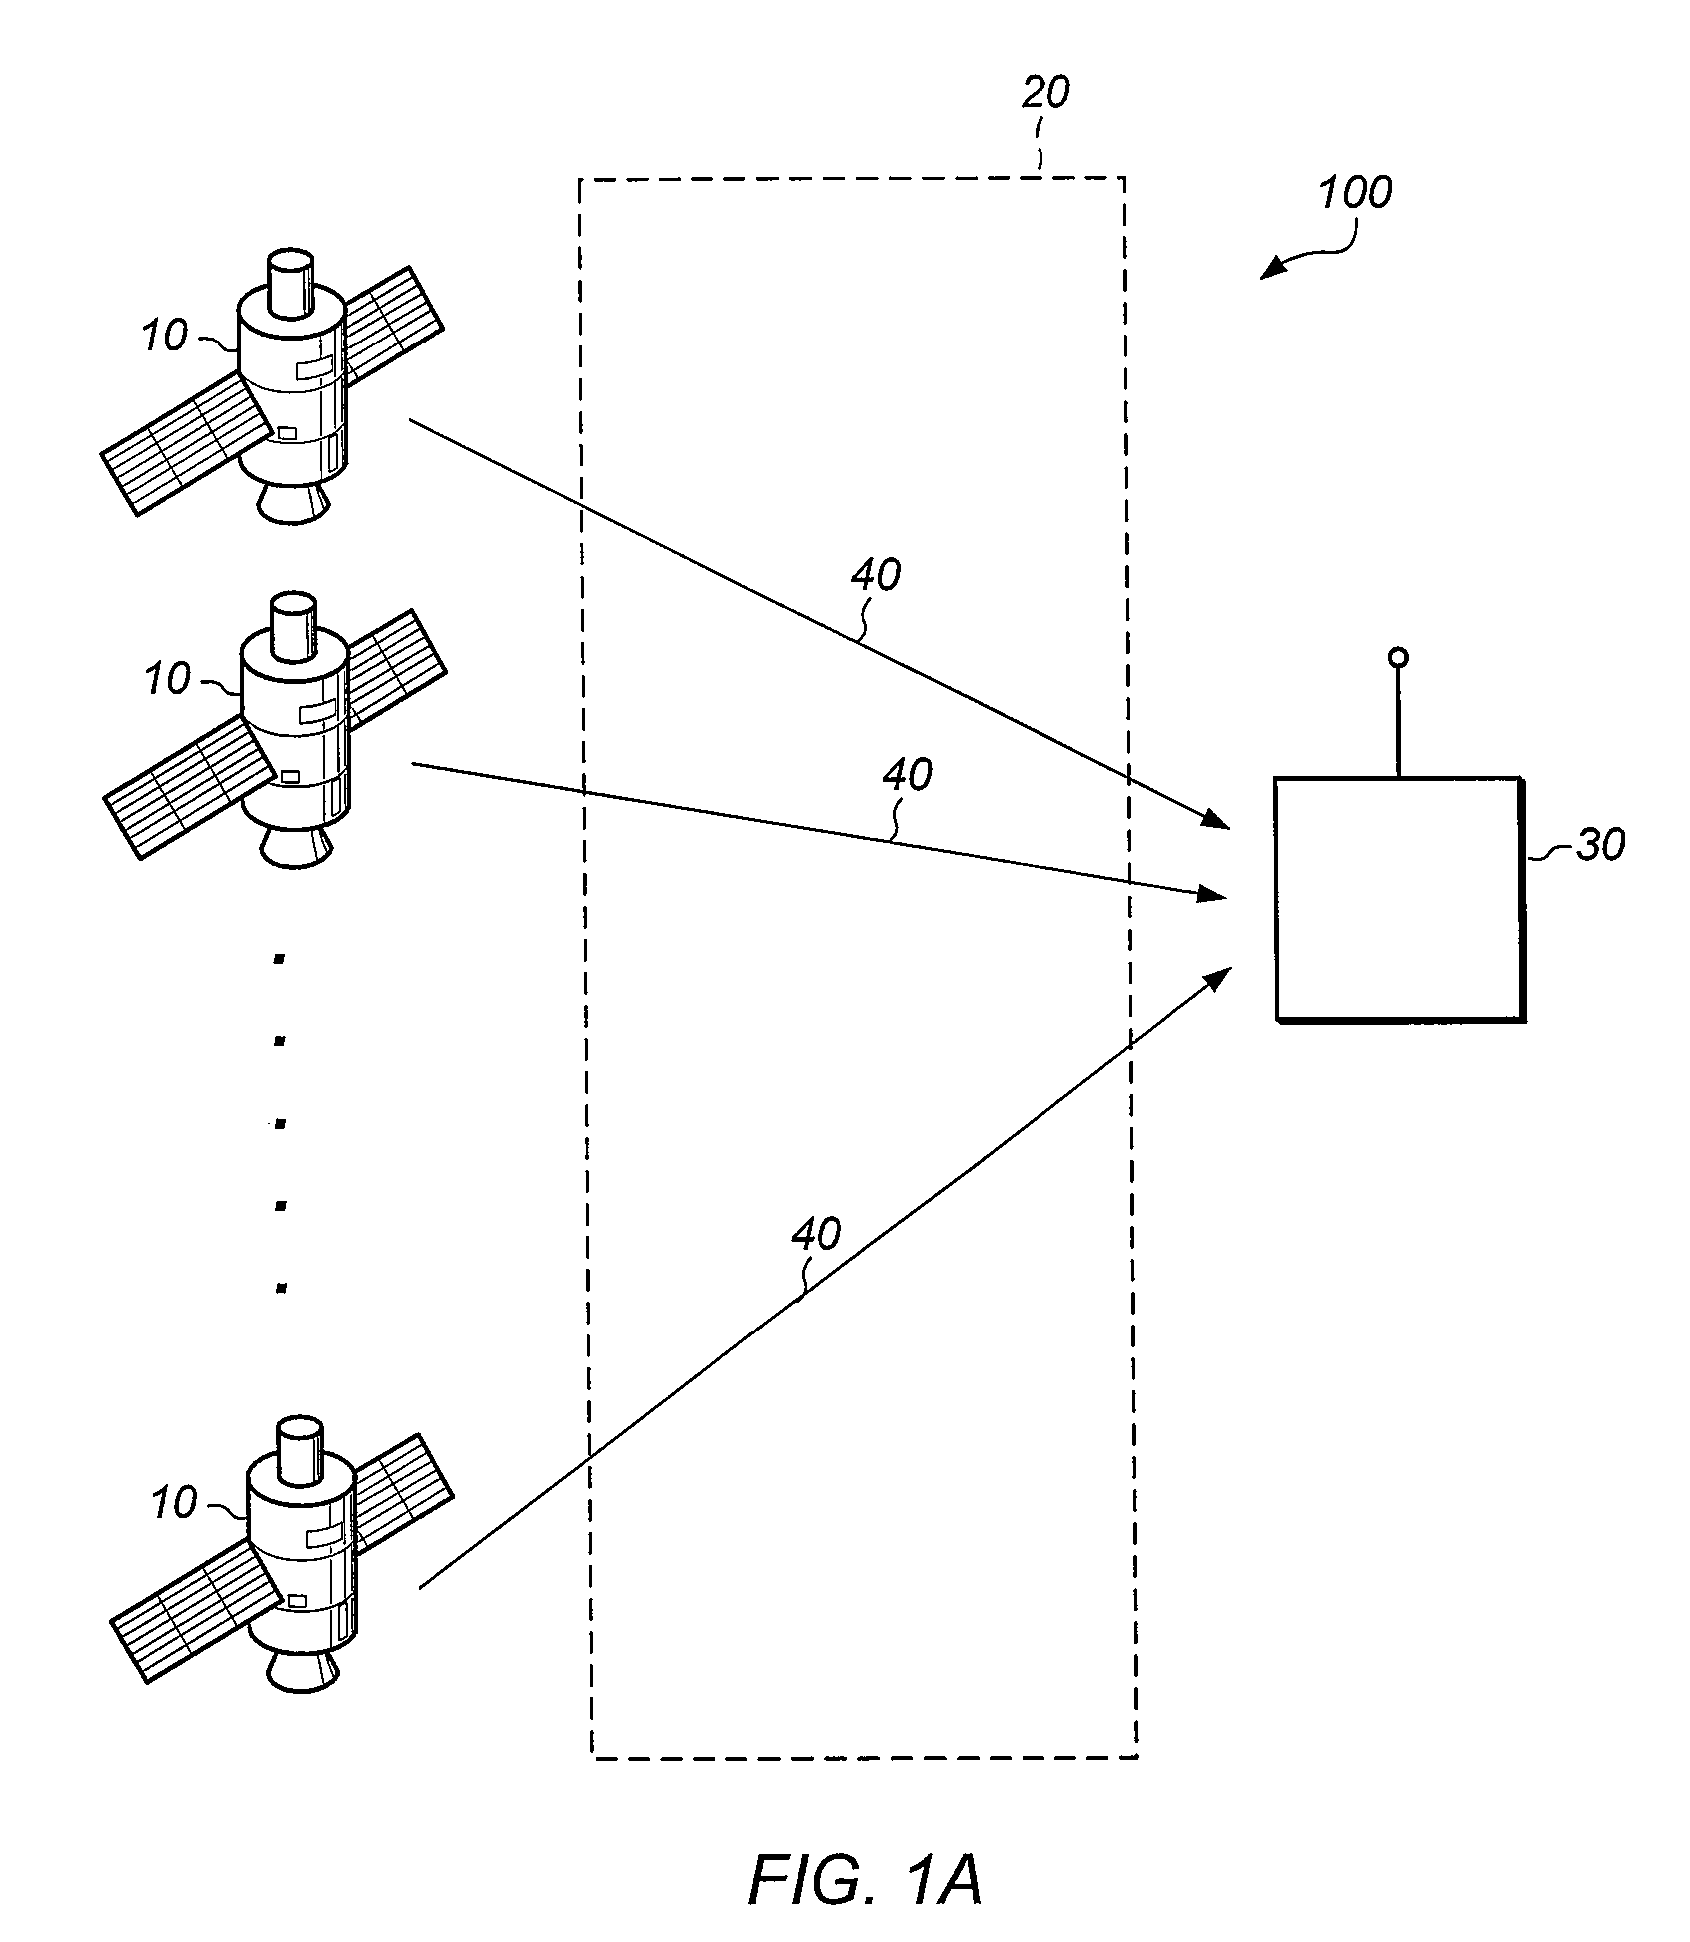 Crosscorrelation interference mitigating position estimation systems and methods therefor